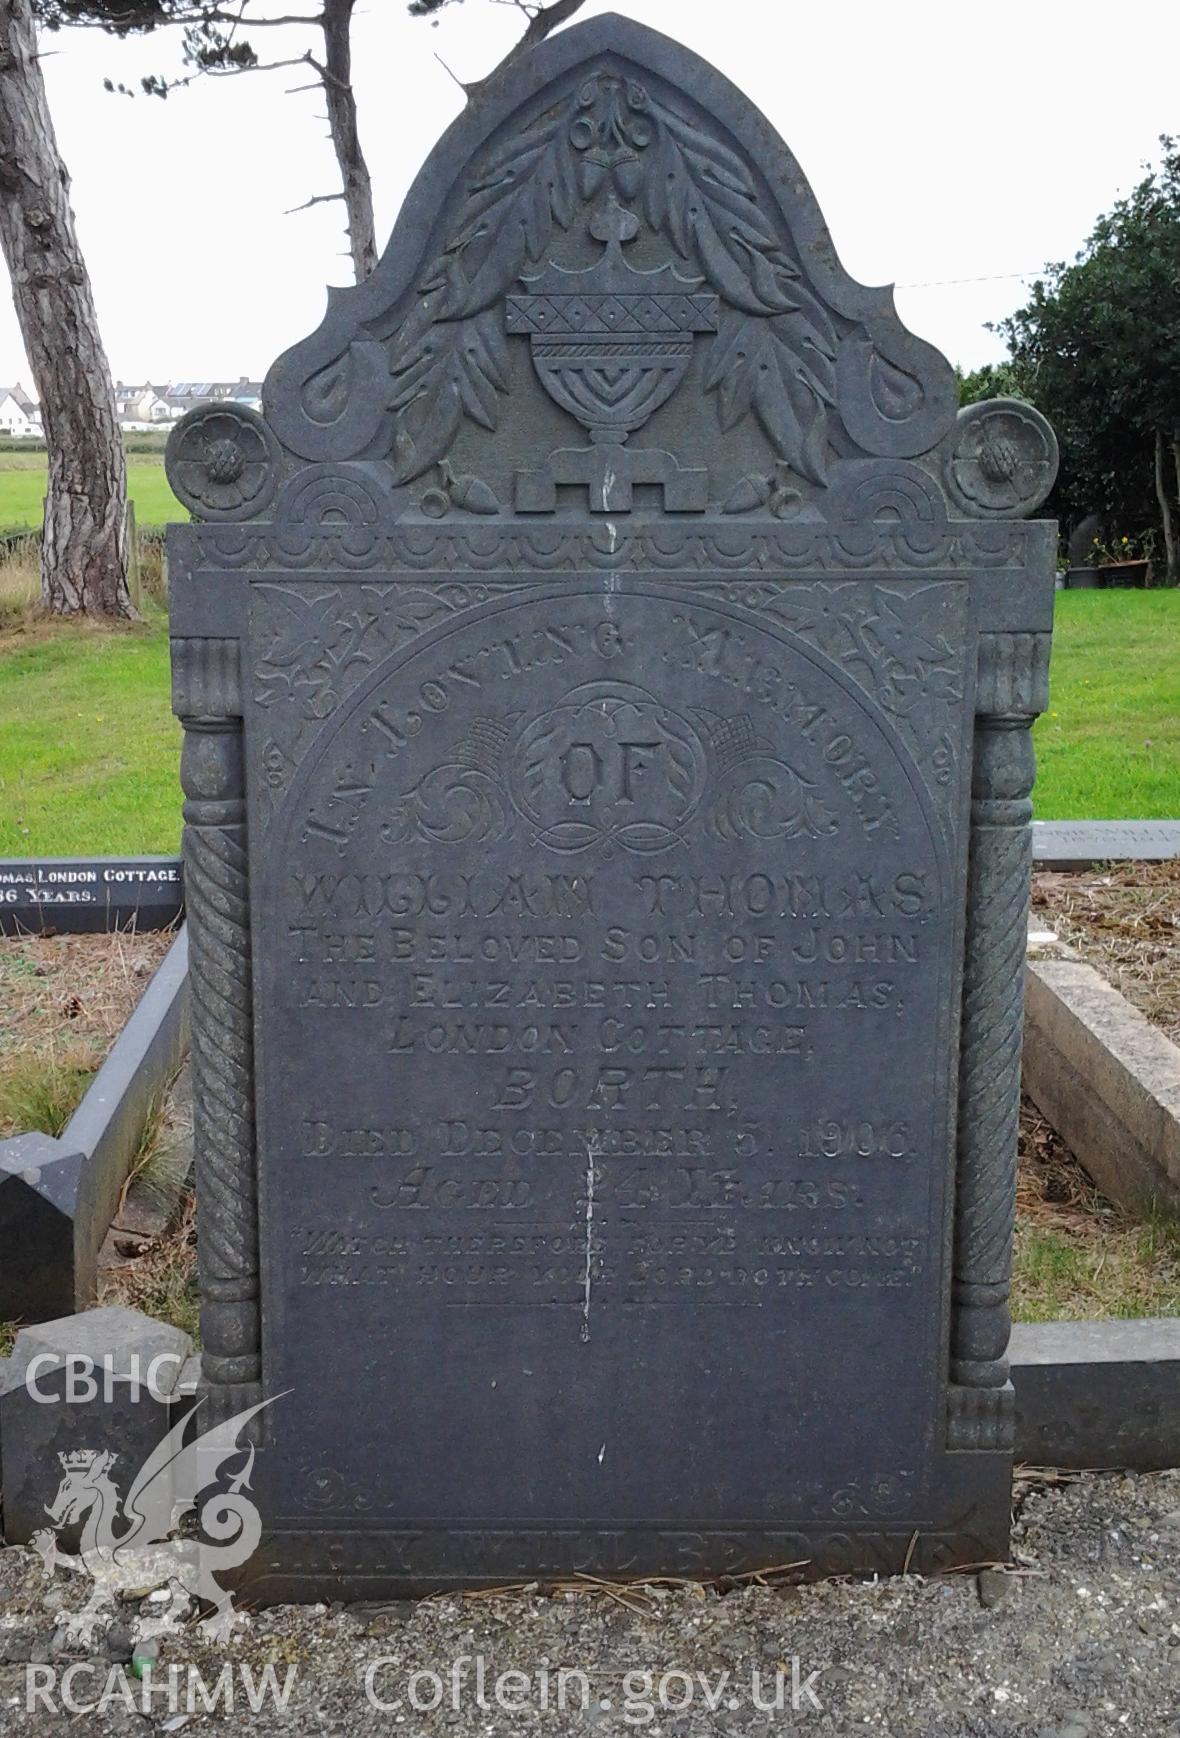 Memorial to William Thomas of London Cottage, Borth, died December 5 1906